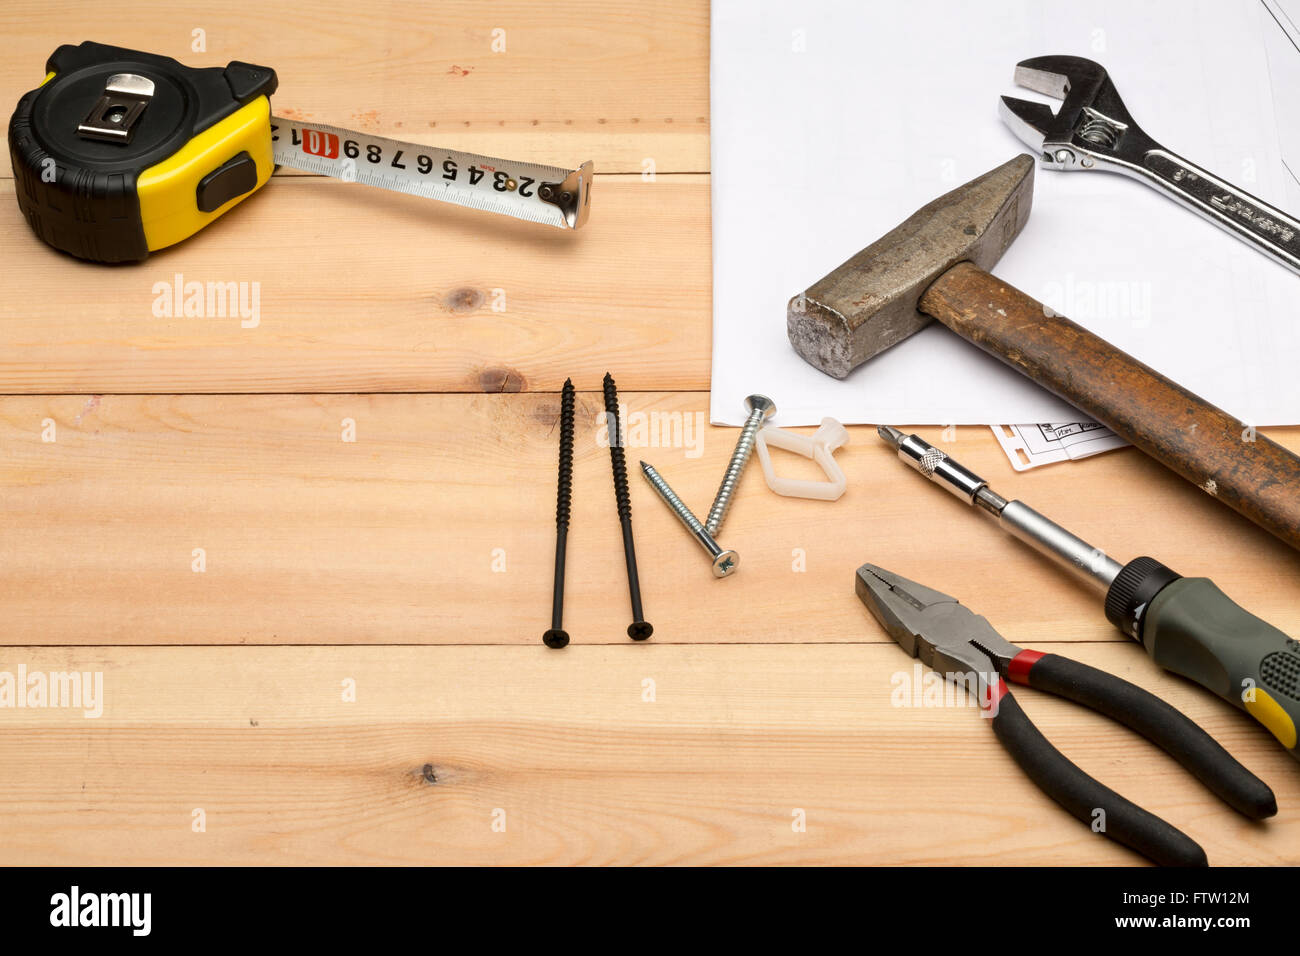 Set of different tools for repair and construction: hammer,screwdriver,screws,meter,wrench,hand tool Stock Photo